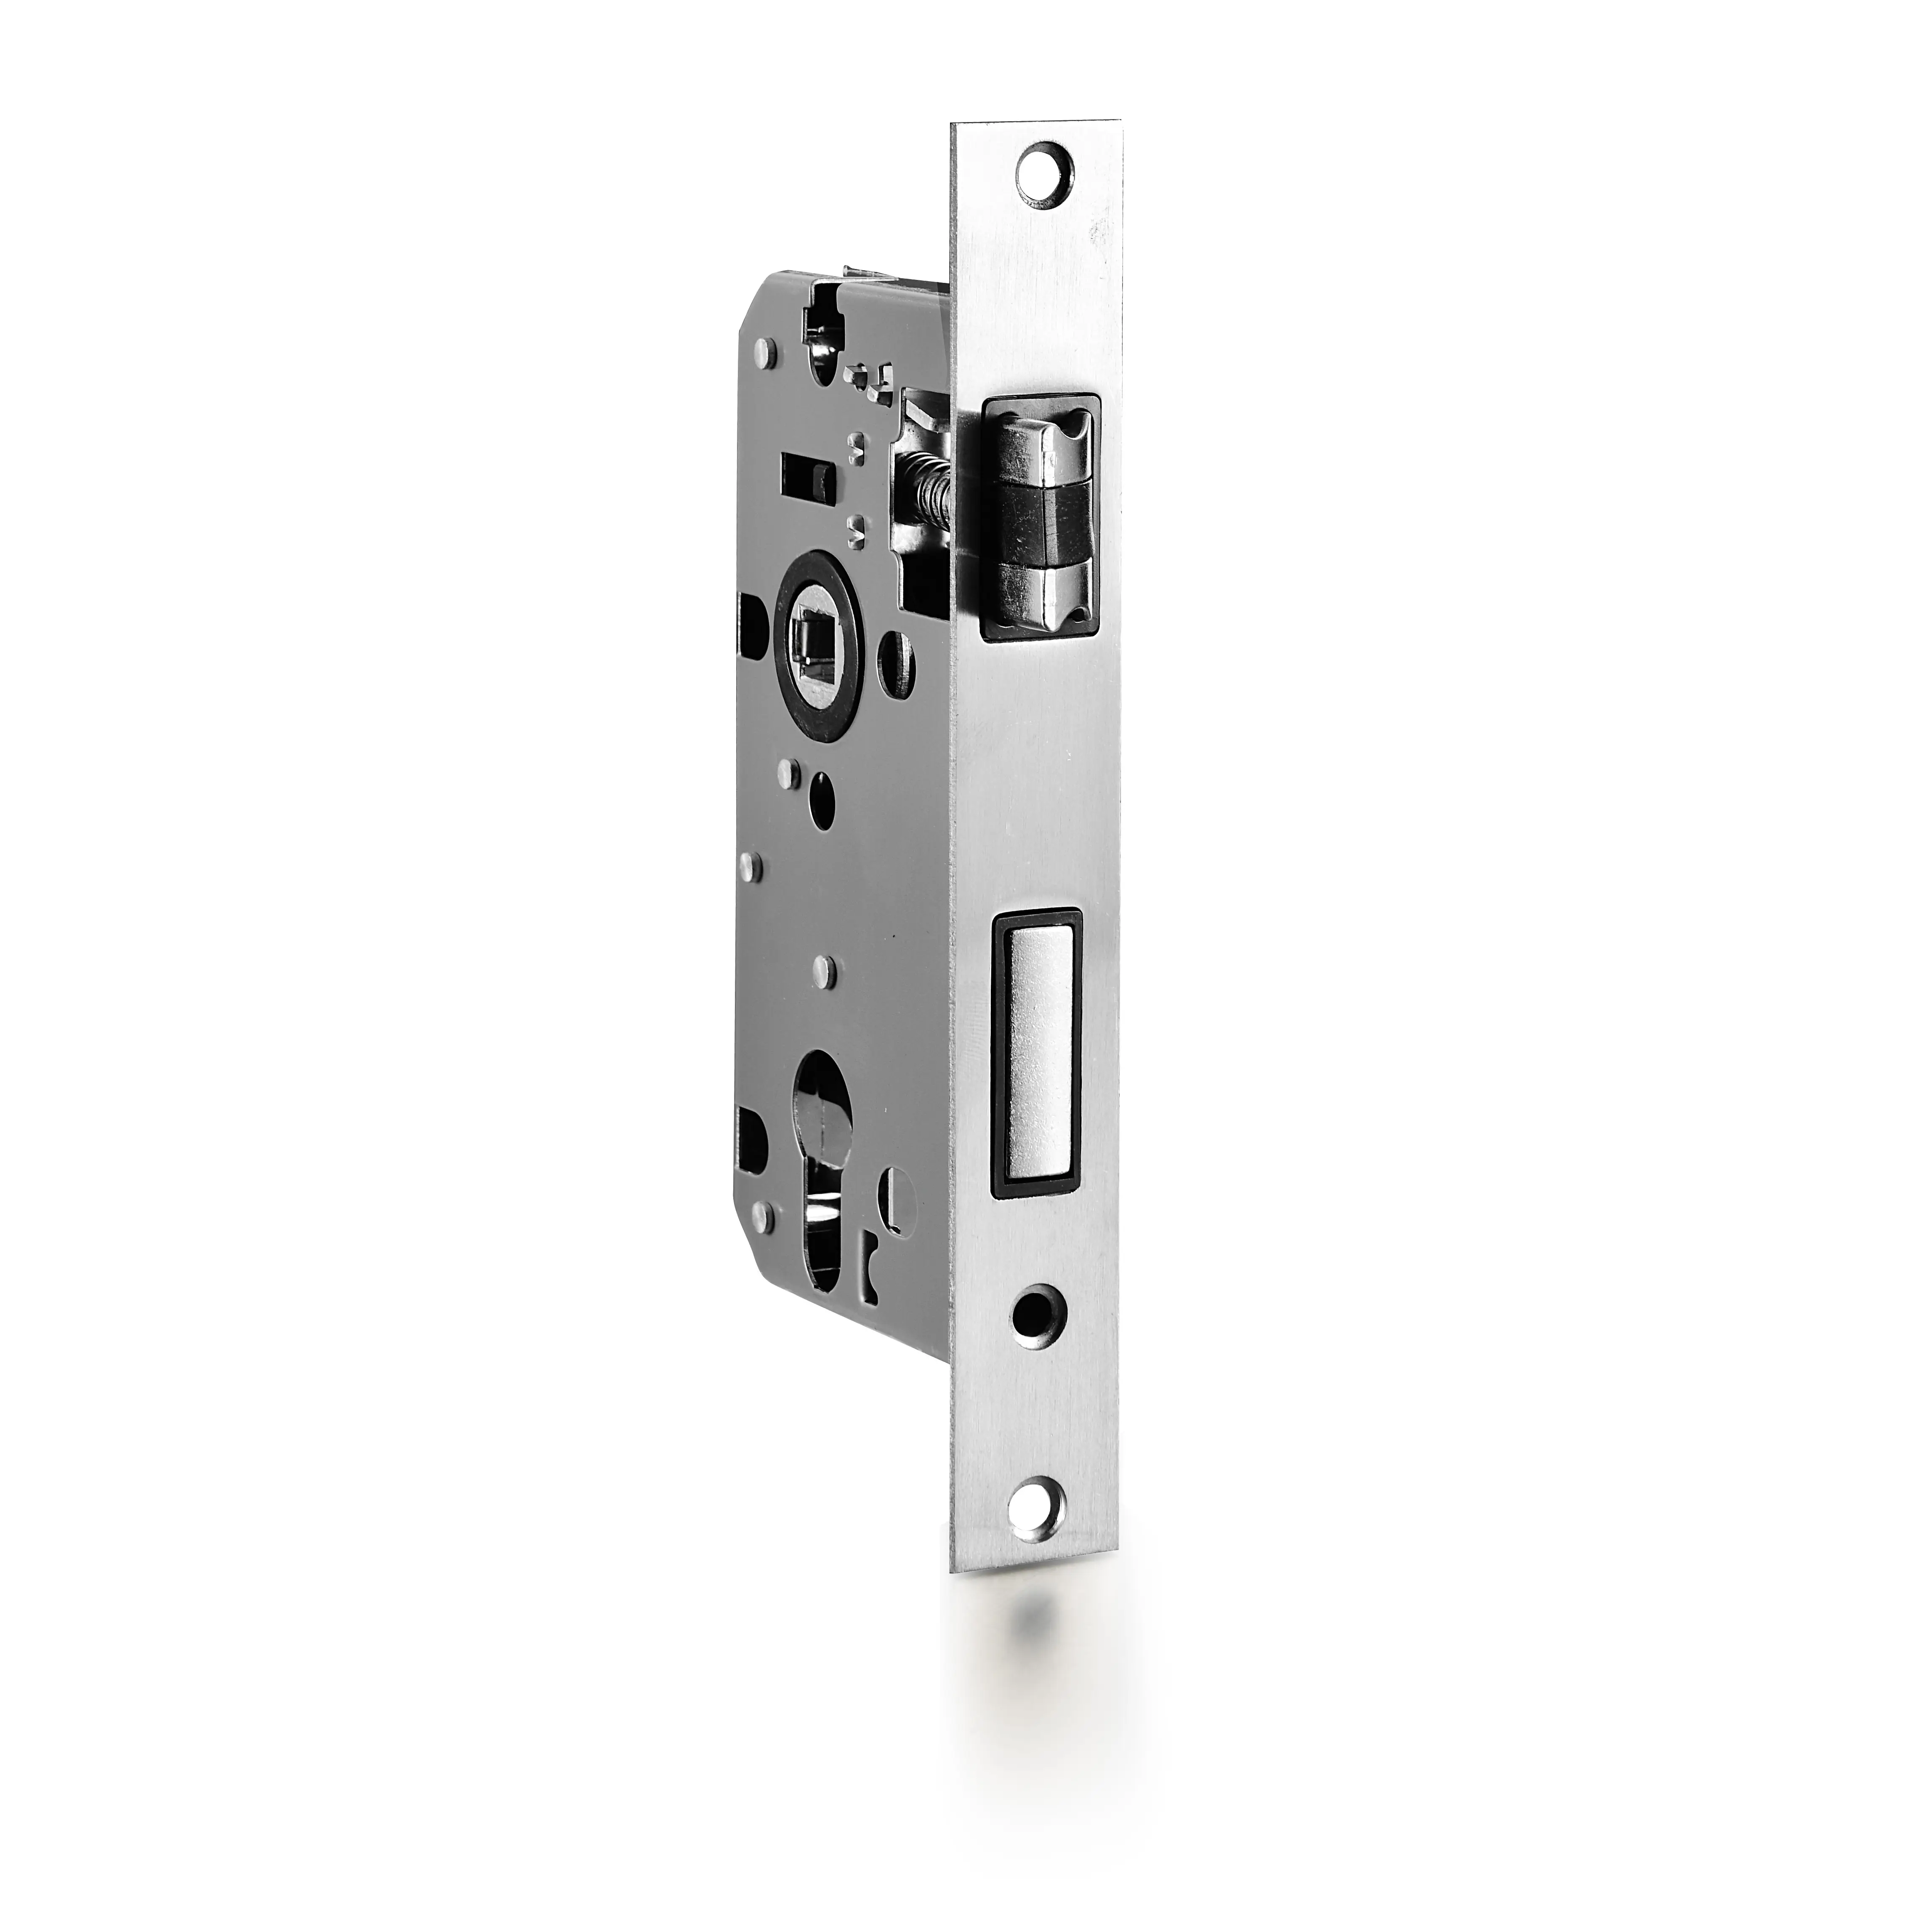 Stainless Steel Door Handle Set With Lock Body Lock Core For Interior Doors/offices/apartments